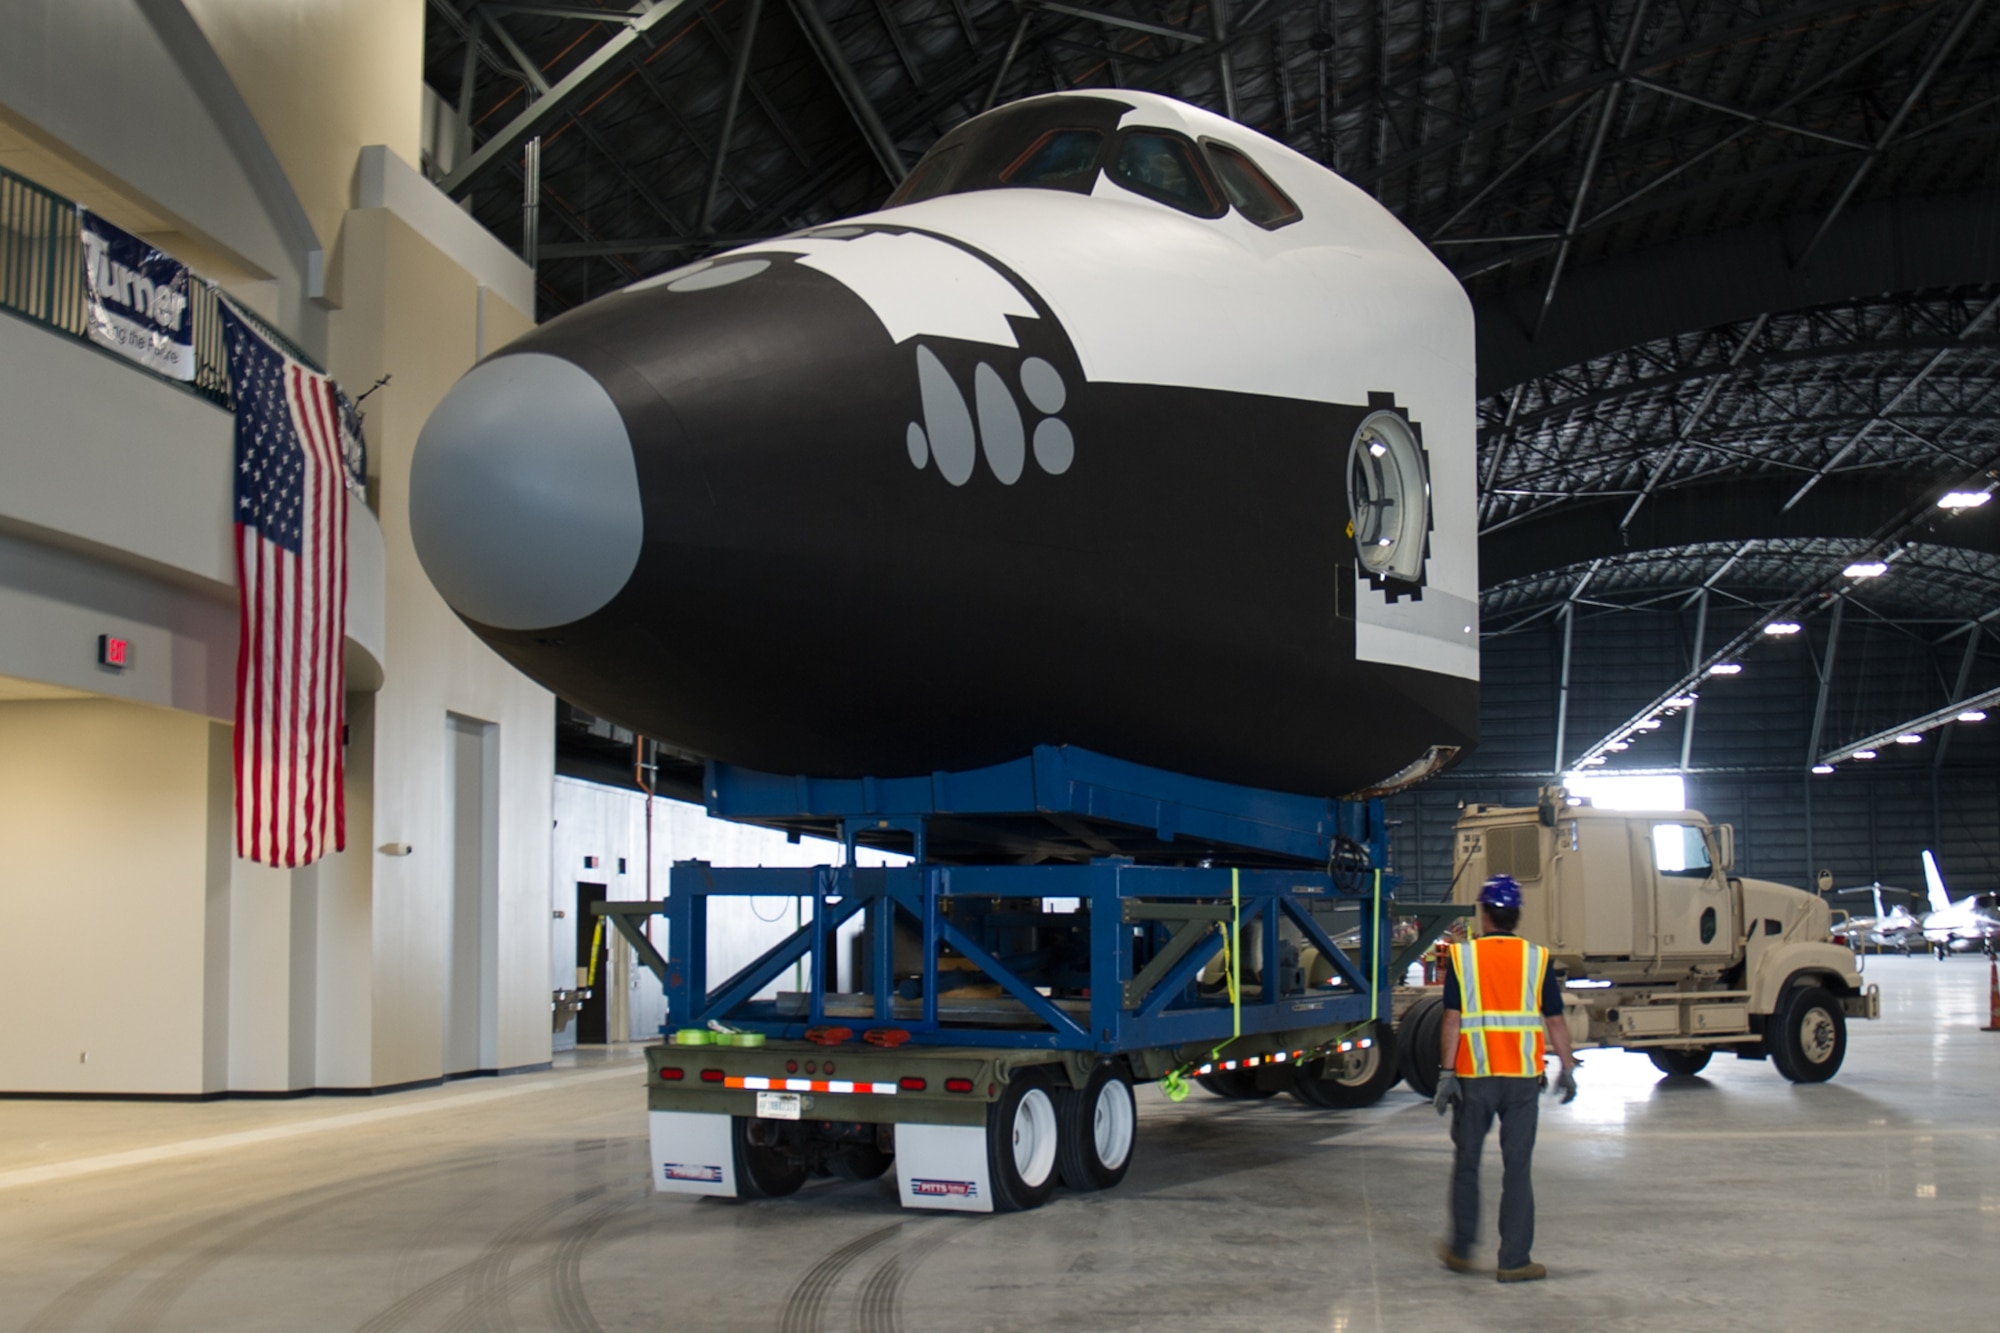 DAYTON, Ohio -- Restoration staff move the Space Shuttle Exhibit(CCT) into the new fourth building at the National Museum of the U.S. Air Force on Oct. 22, 2015. (U.S. Air Force photo)